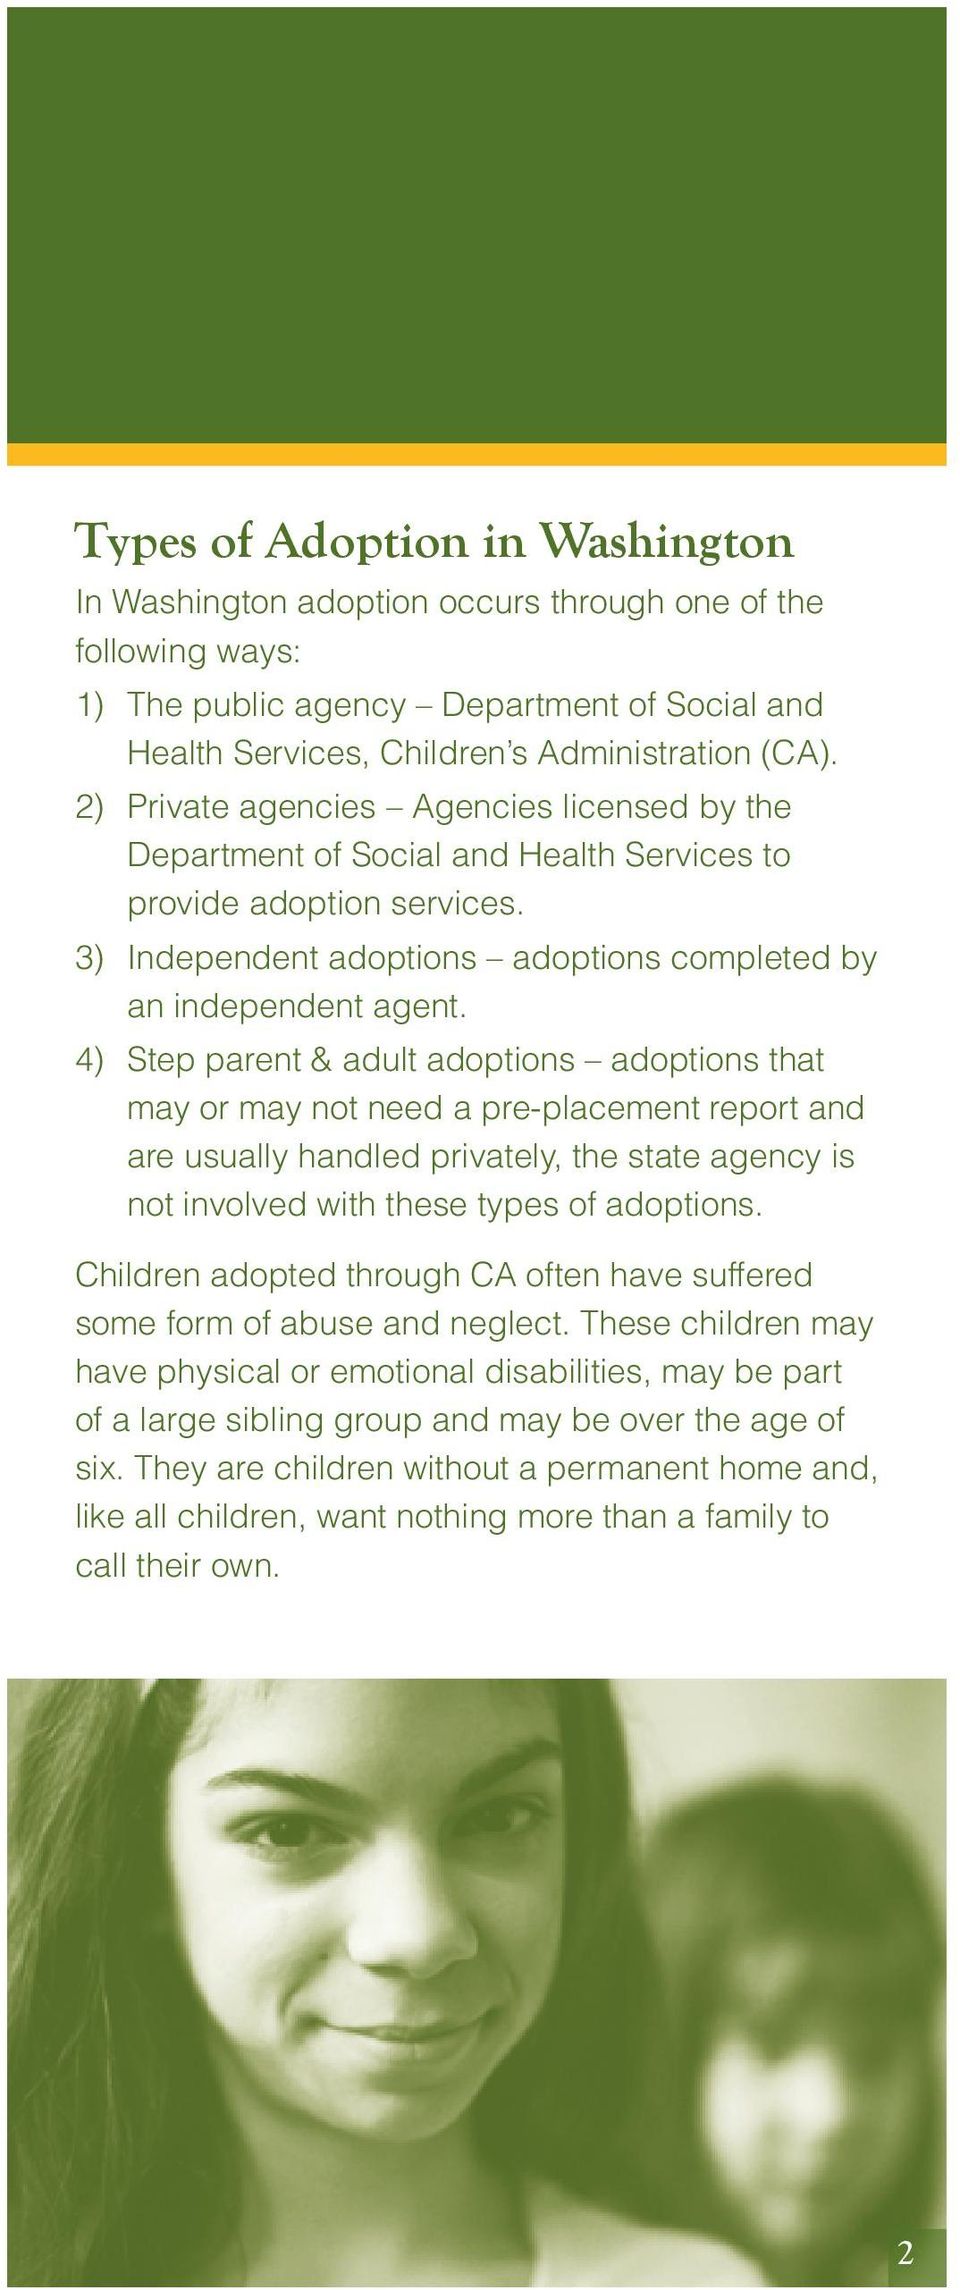 4) Step parent & adult adoptions adoptions that may or may not need a pre-placement report and are usually handled privately, the state agency is not involved with these types of adoptions.